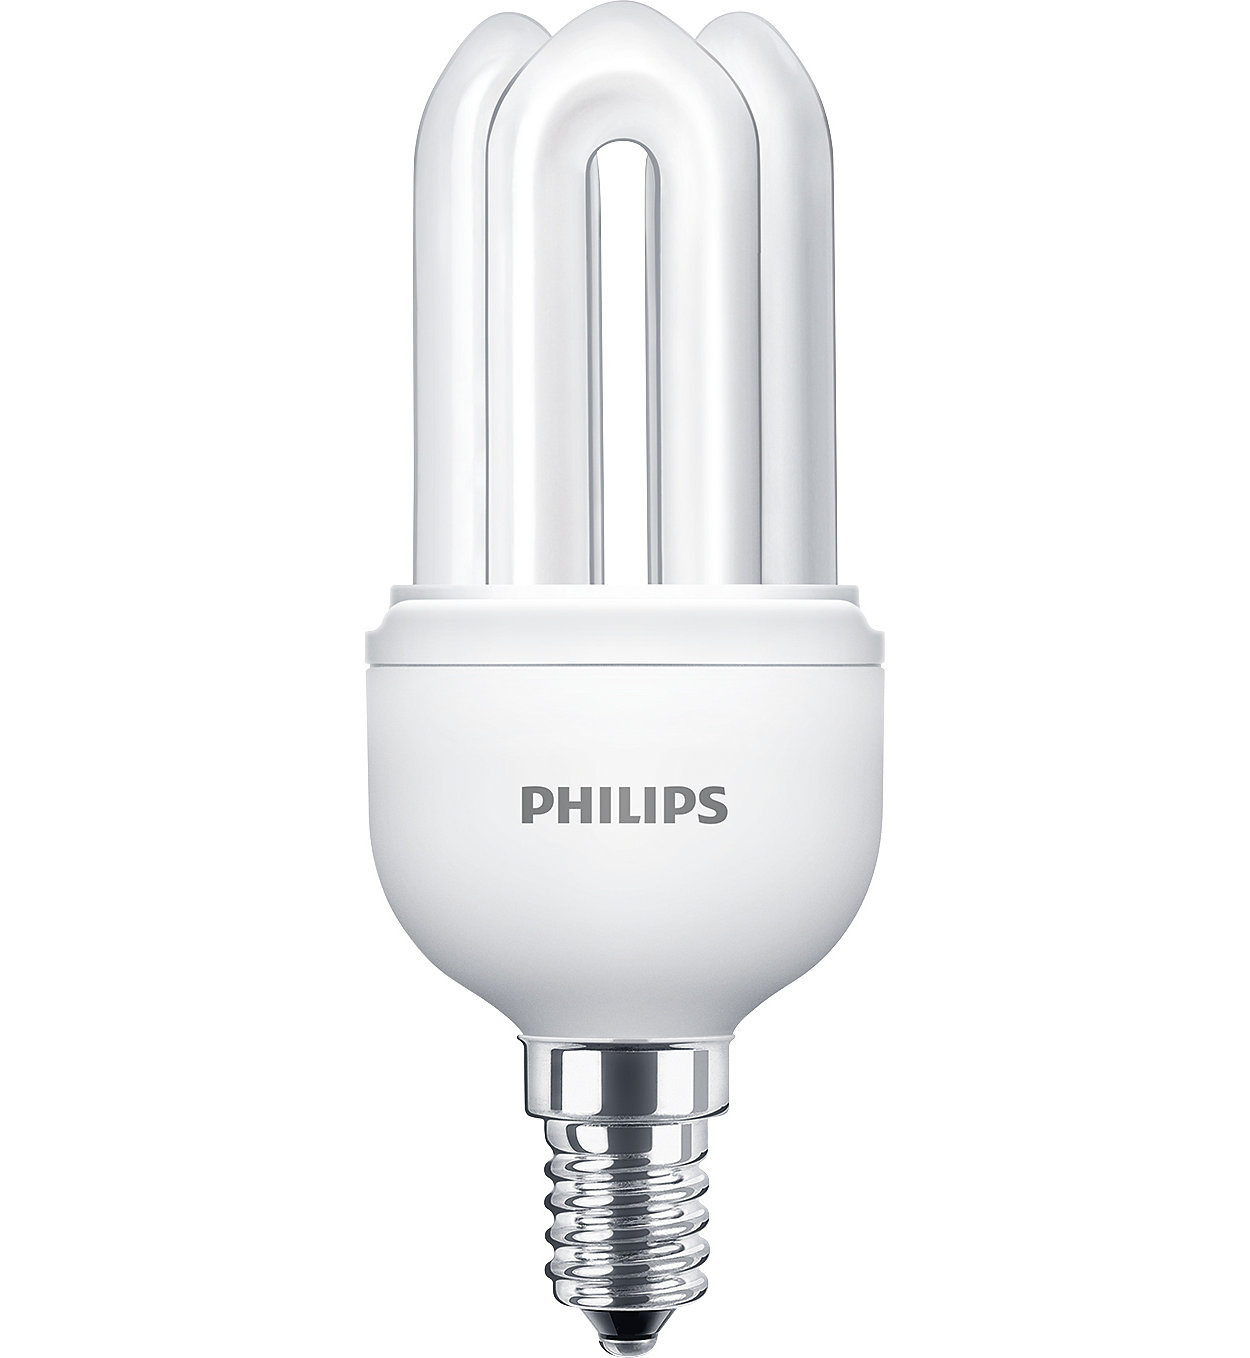 Philips Genie-Ampoule Basse Consommation 11 W E14 CDL 1BC 220-240 V/6 